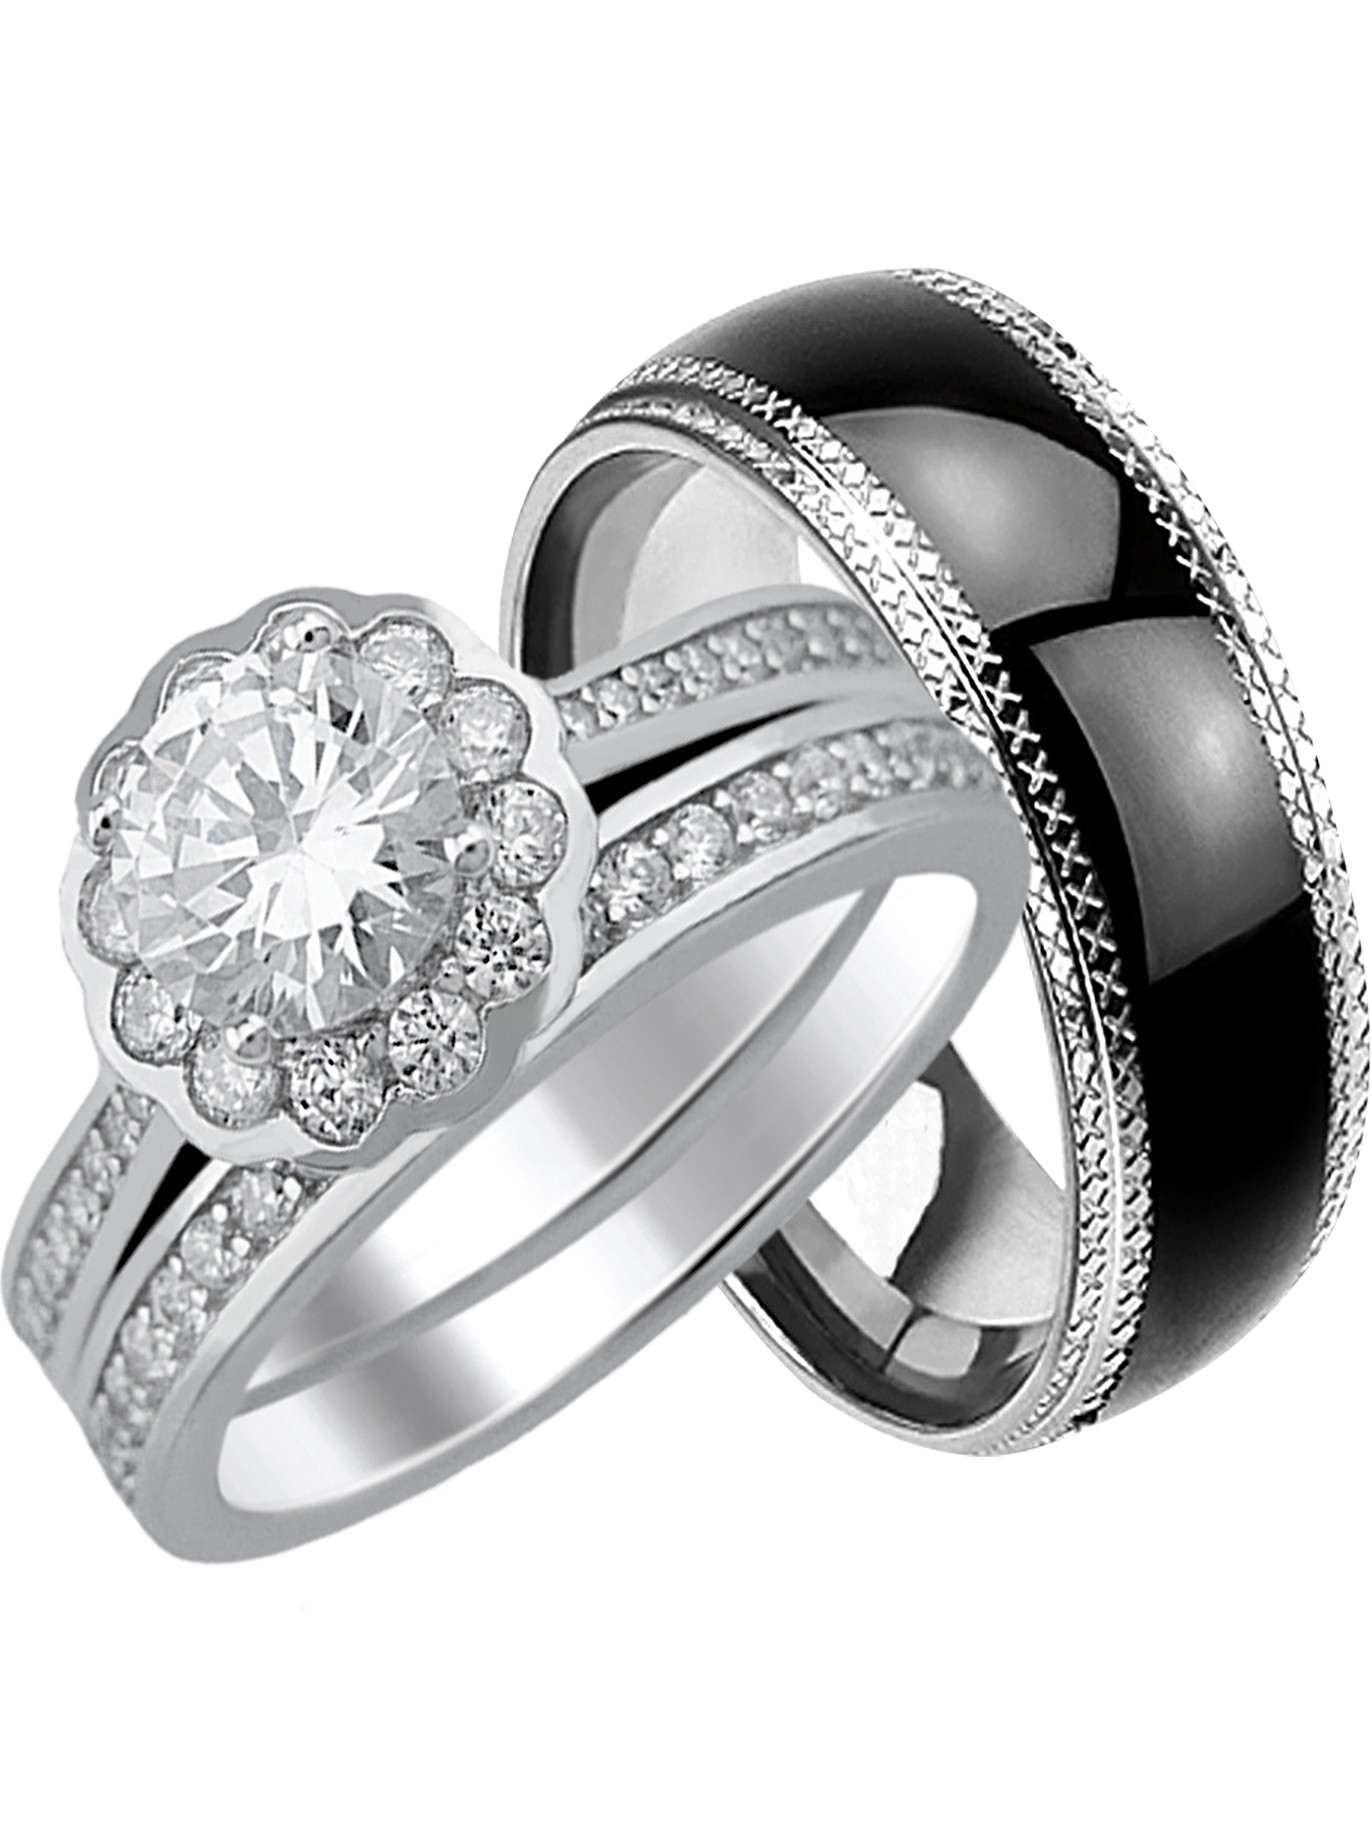 Walmart Wedding Rings For Him
 His Hers CZ Wedding Ring Set Unique Matching Wedding Bands